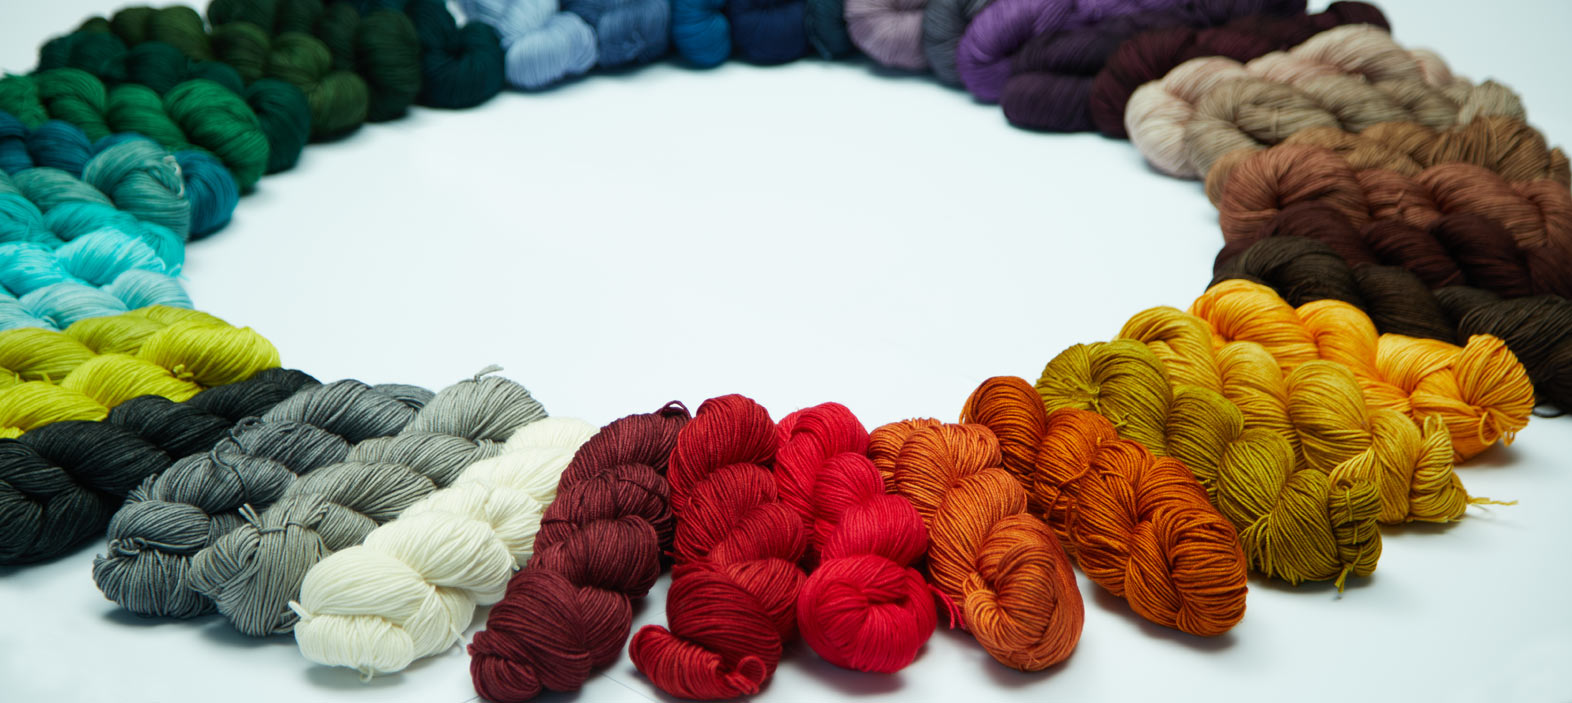 KnitPro launched a new line of Hand-Dyed Yarns with Symfonie